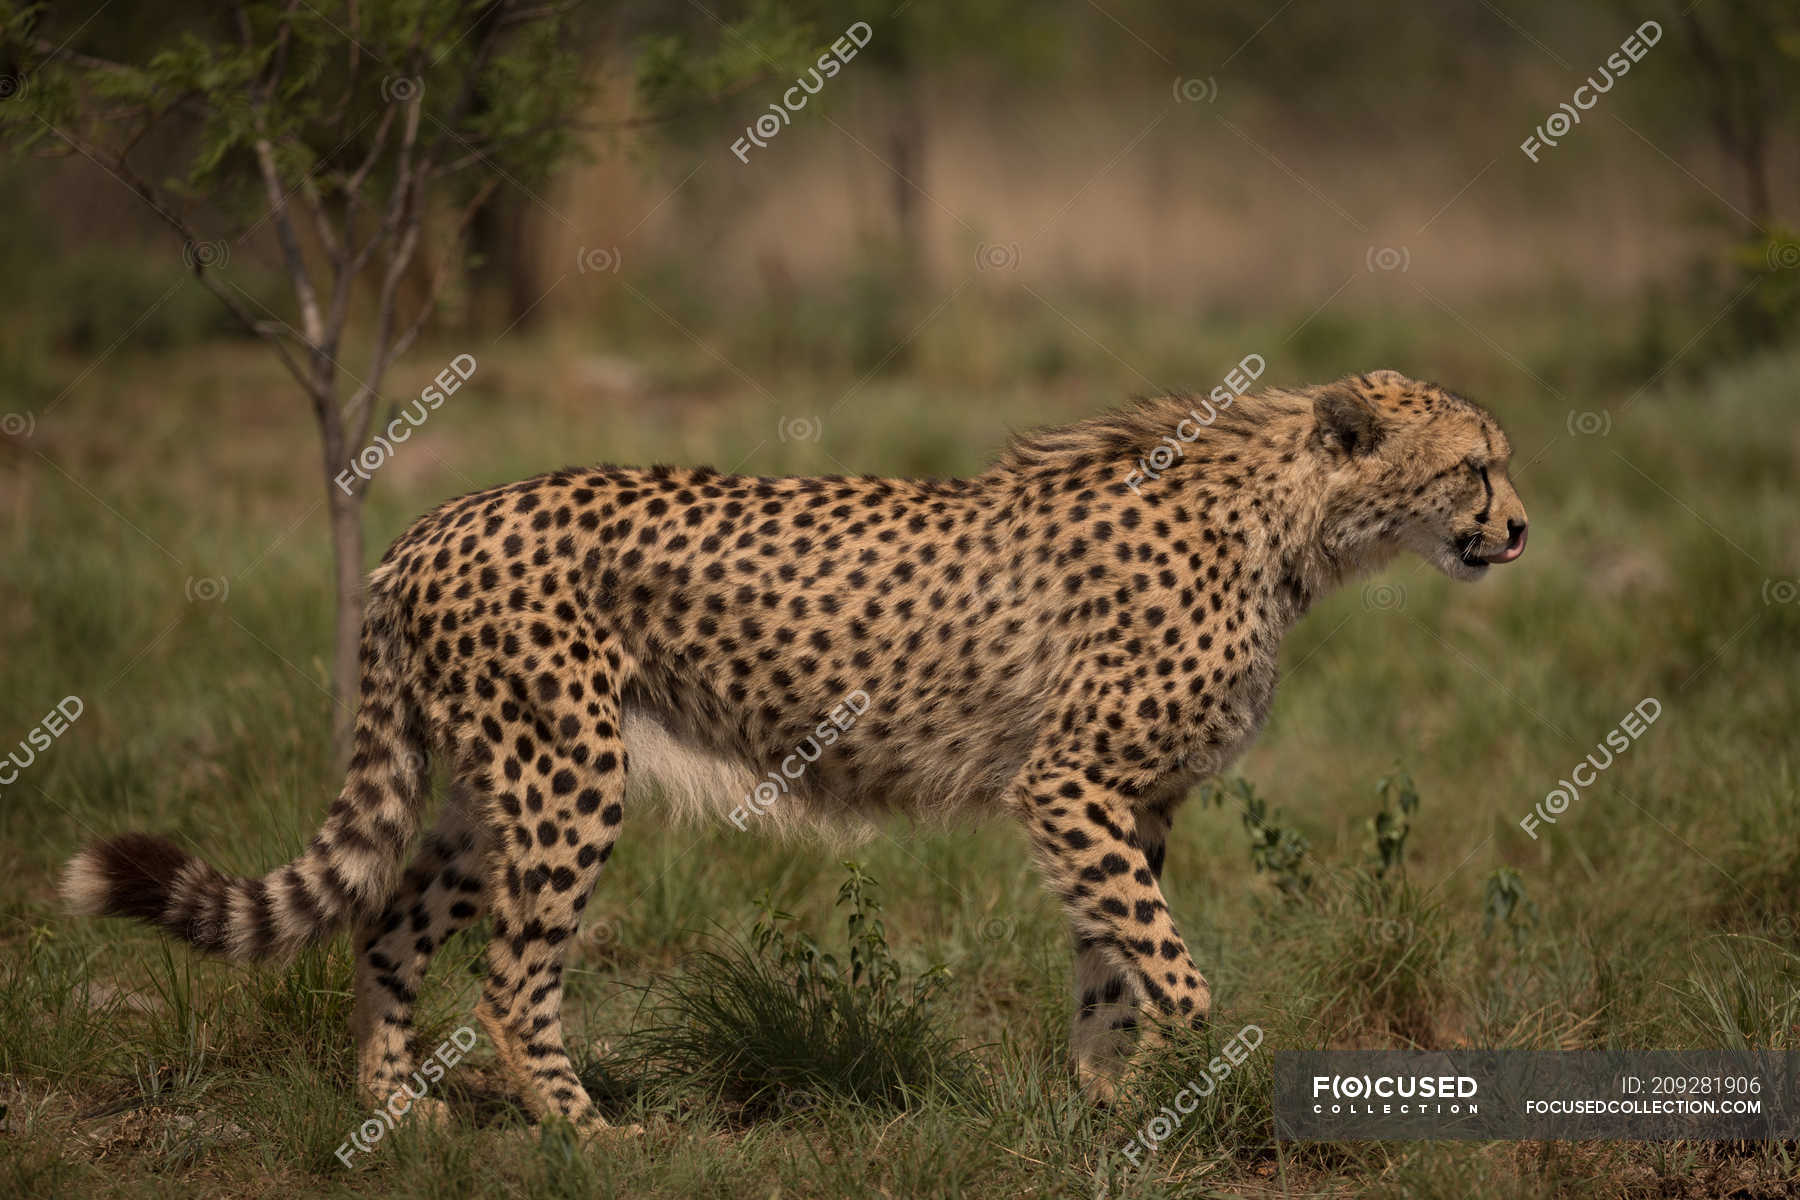 Cheetah walking in grassland at safari park on a sunny day — wild, South  Africa - Stock Photo | #209281906